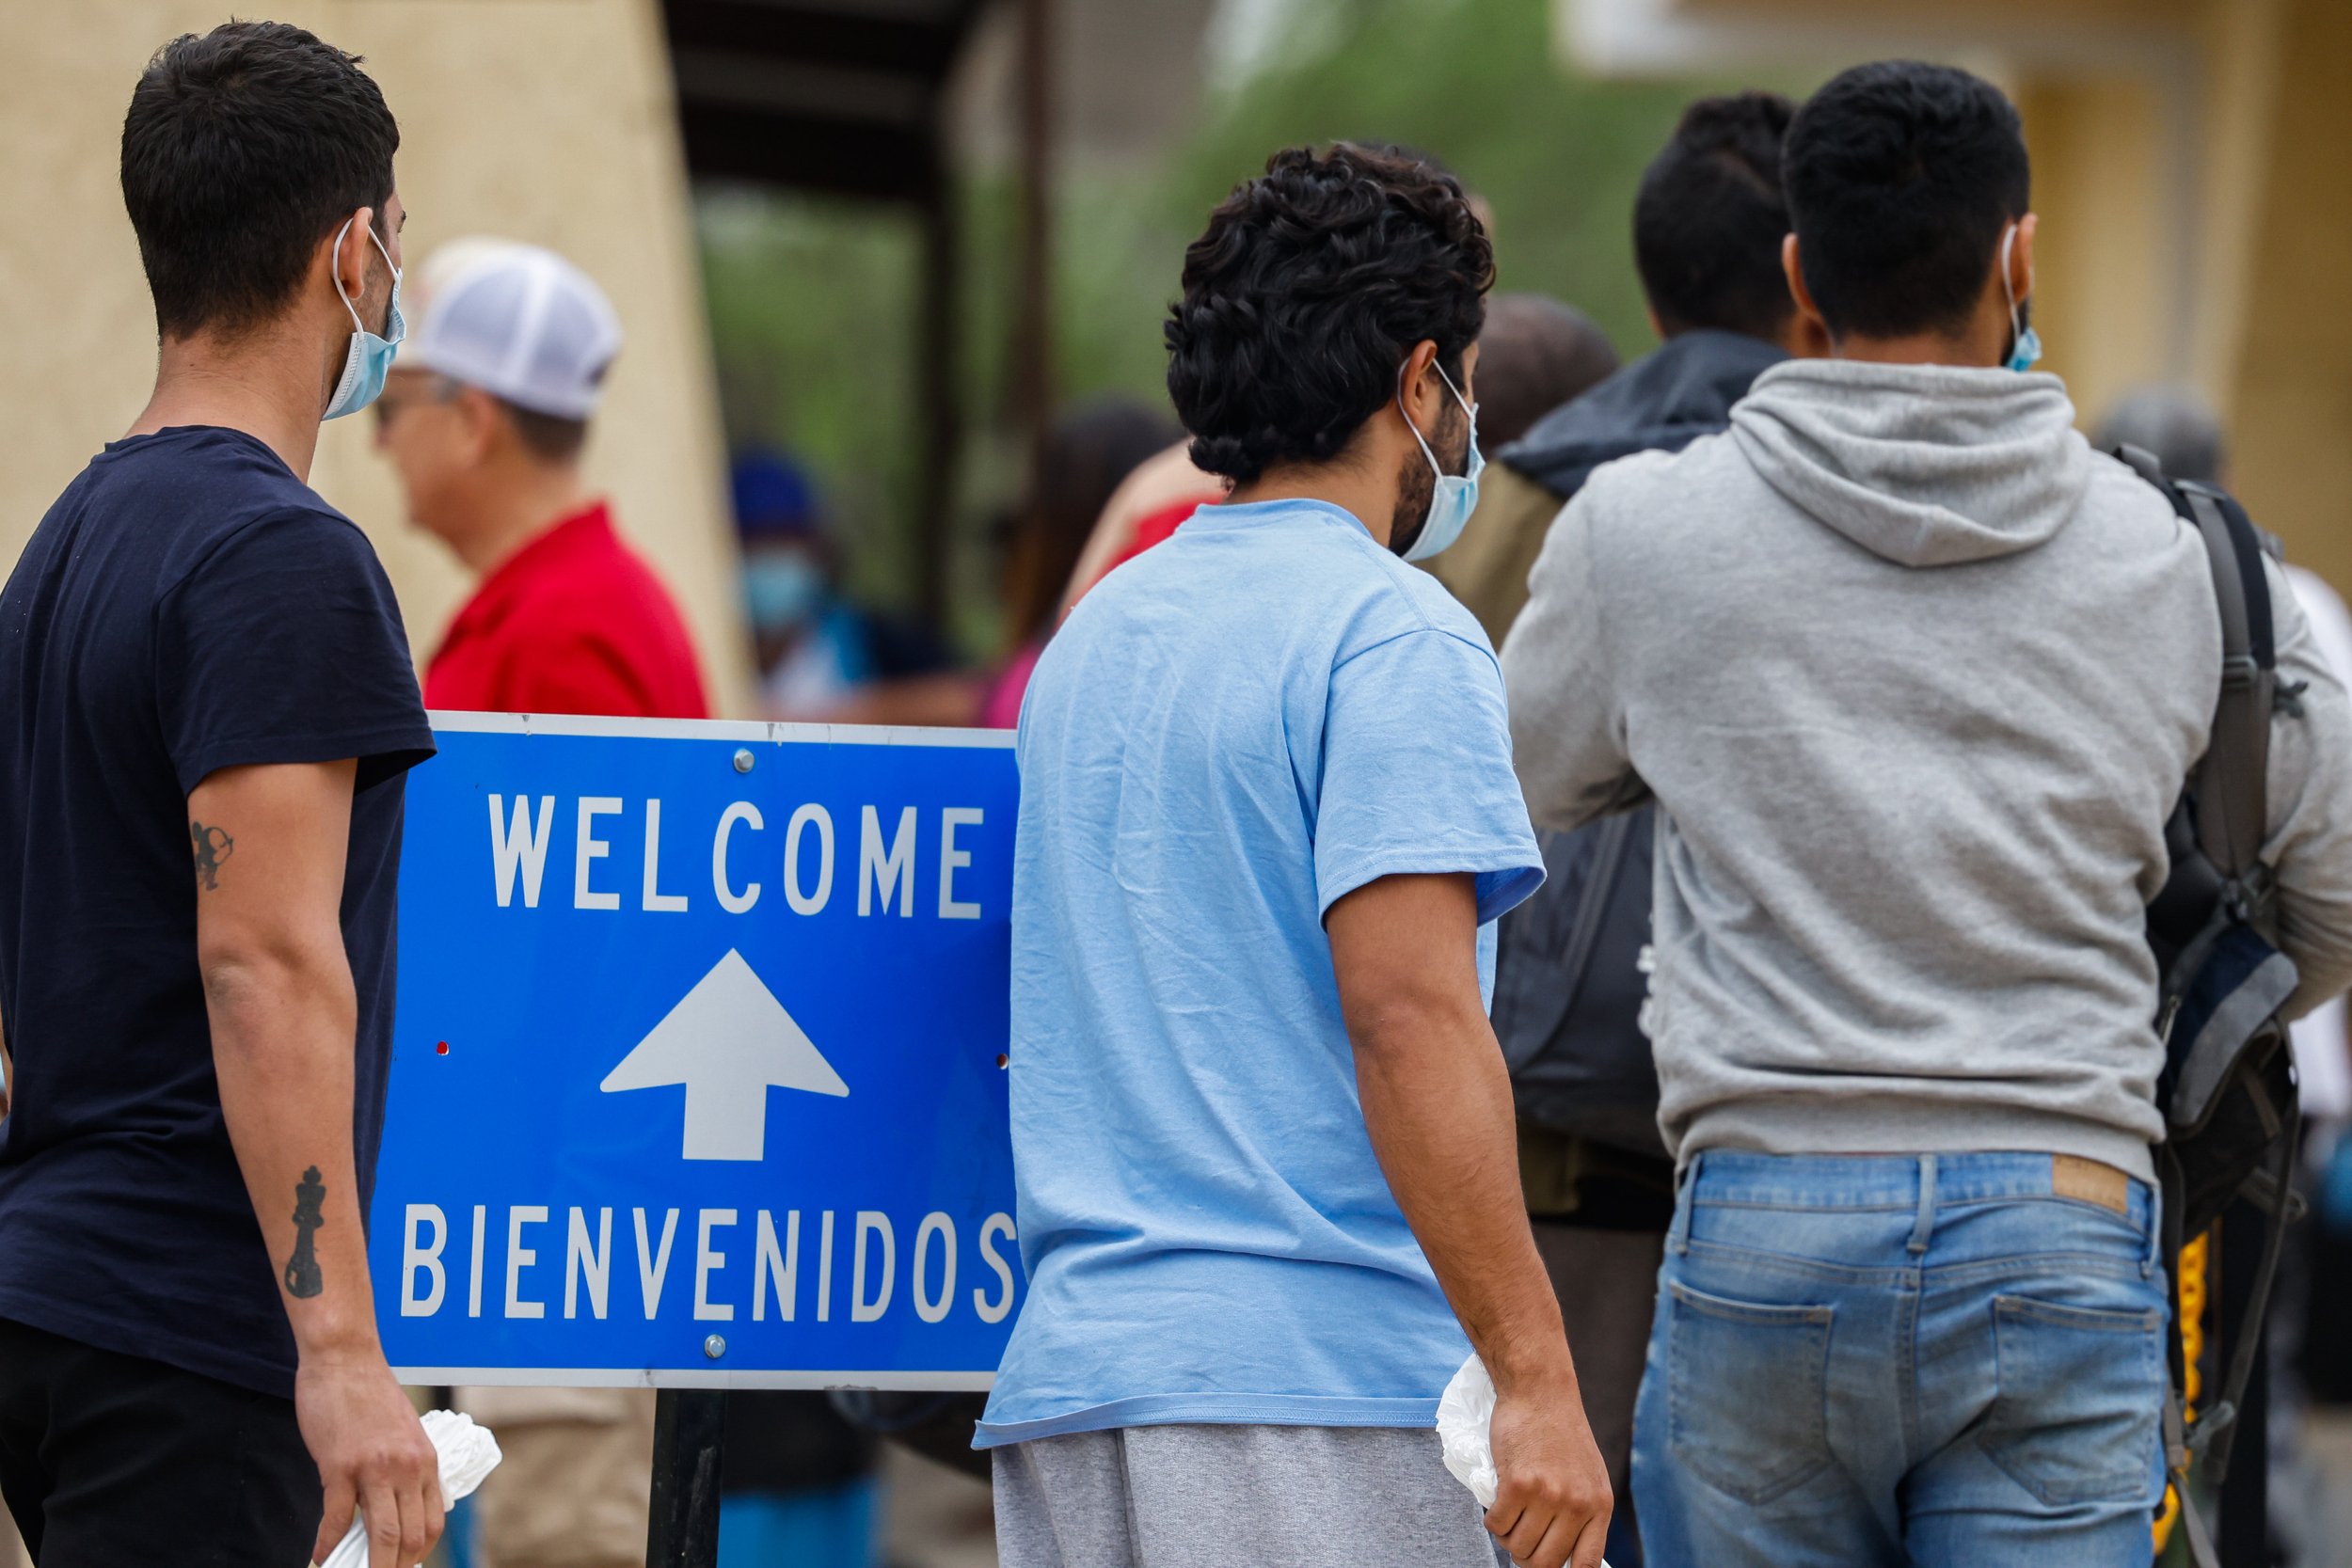  Venezuelan Victor Rodriguez, 26, middle, enters to the the Val Verde Border Humanitarian Coalition base of operations in Del Rio, Texas on Wednesday, April 20, 2022, after disembarking a bus that brought him along with other migrants from a detentio